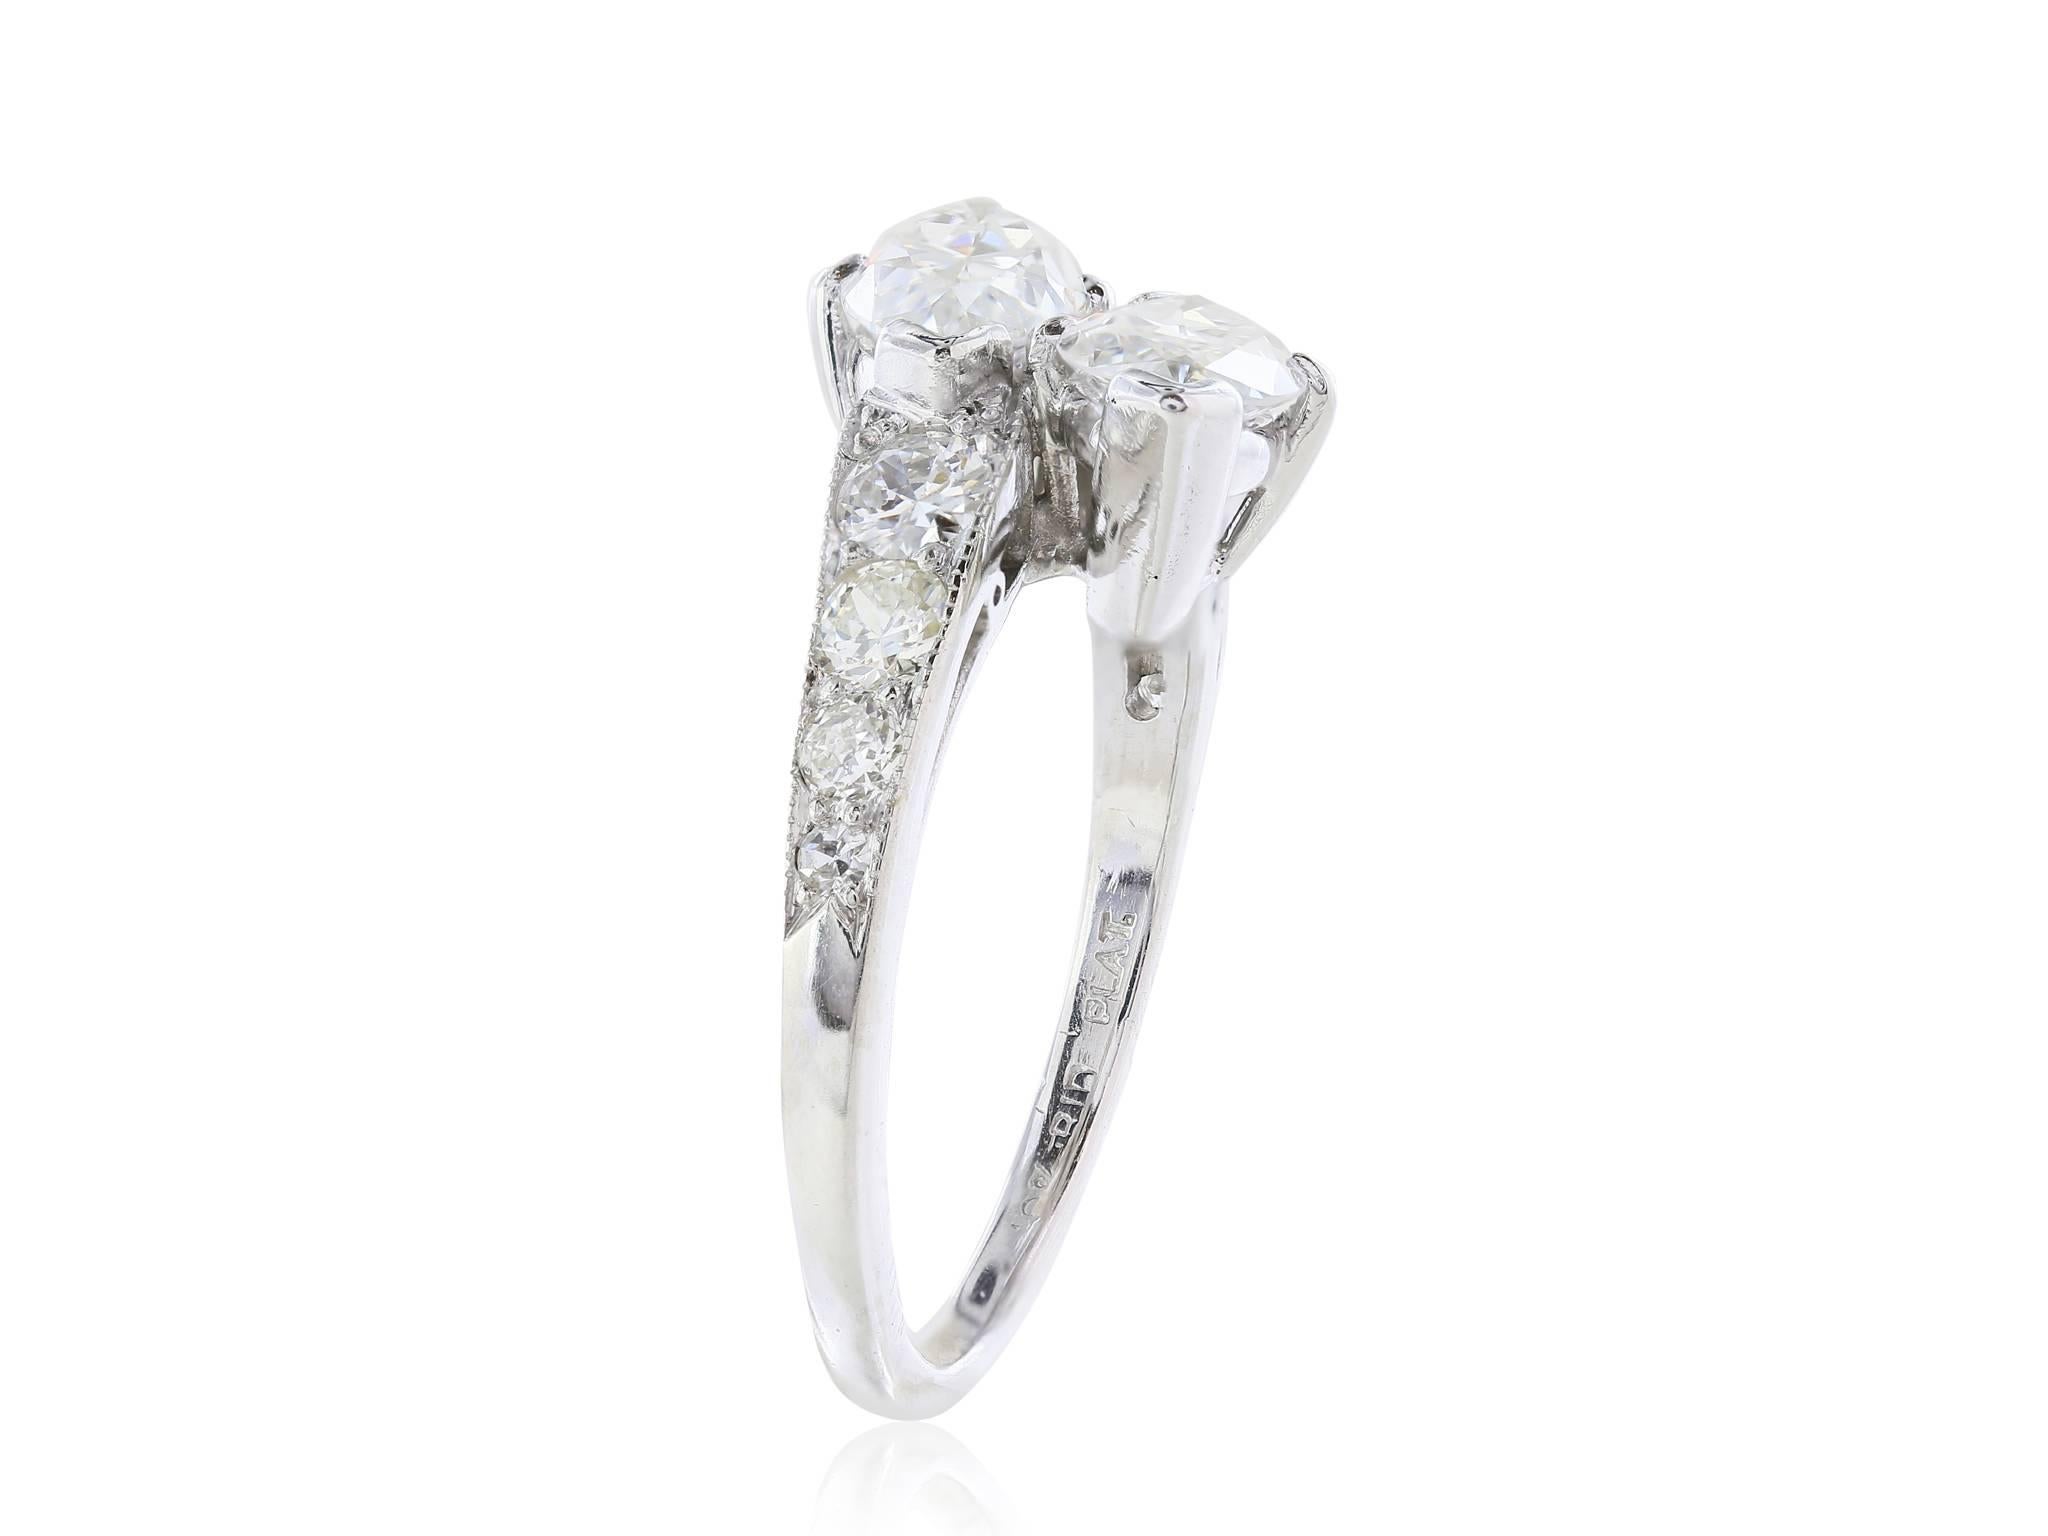 Platinum Marquise Diamond By Pass ring. Consisting of  two Marquise cut Diamonds having a total weight of approximately 2.65 carats flanked by 8 old European cut diamonds